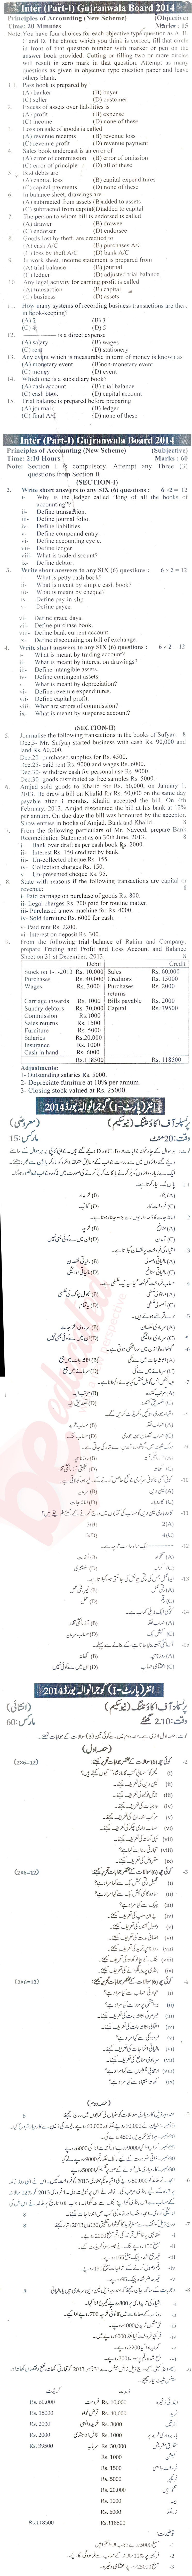 Principles of Accounting ICOM Part 1 Past Paper Group 1 BISE Gujranwala 2014